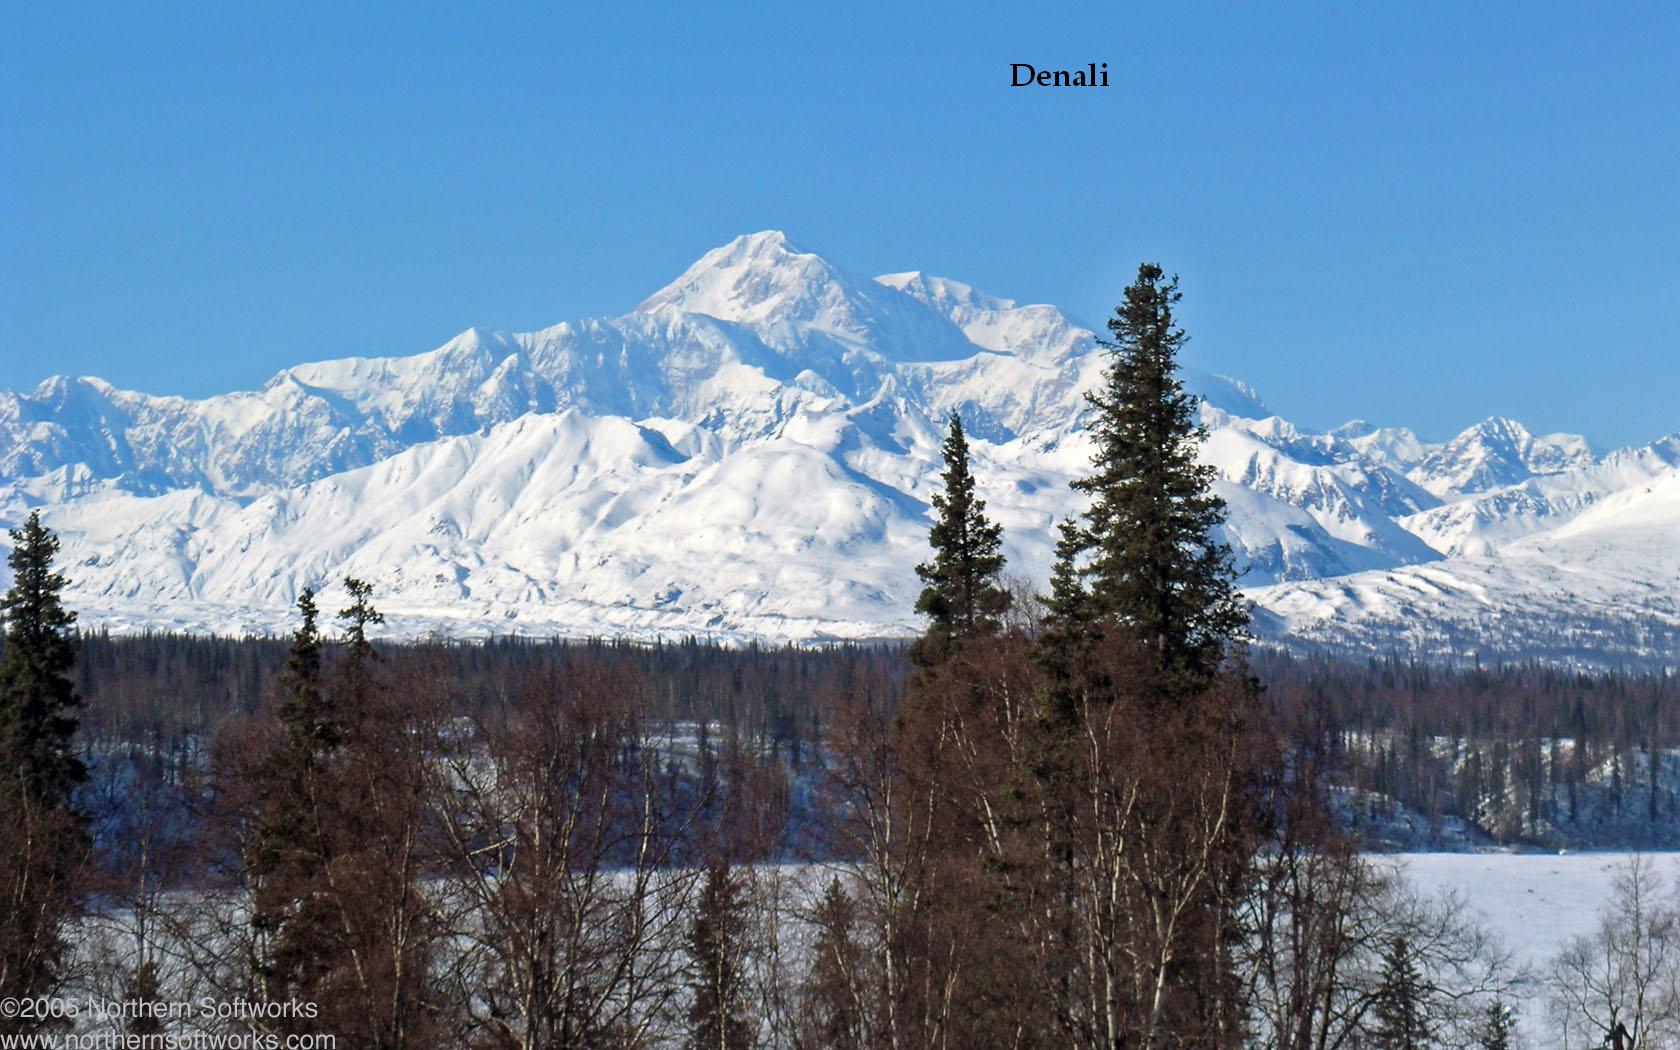 Denali - Formerly known as Mt. Mkinley is not in Colorado